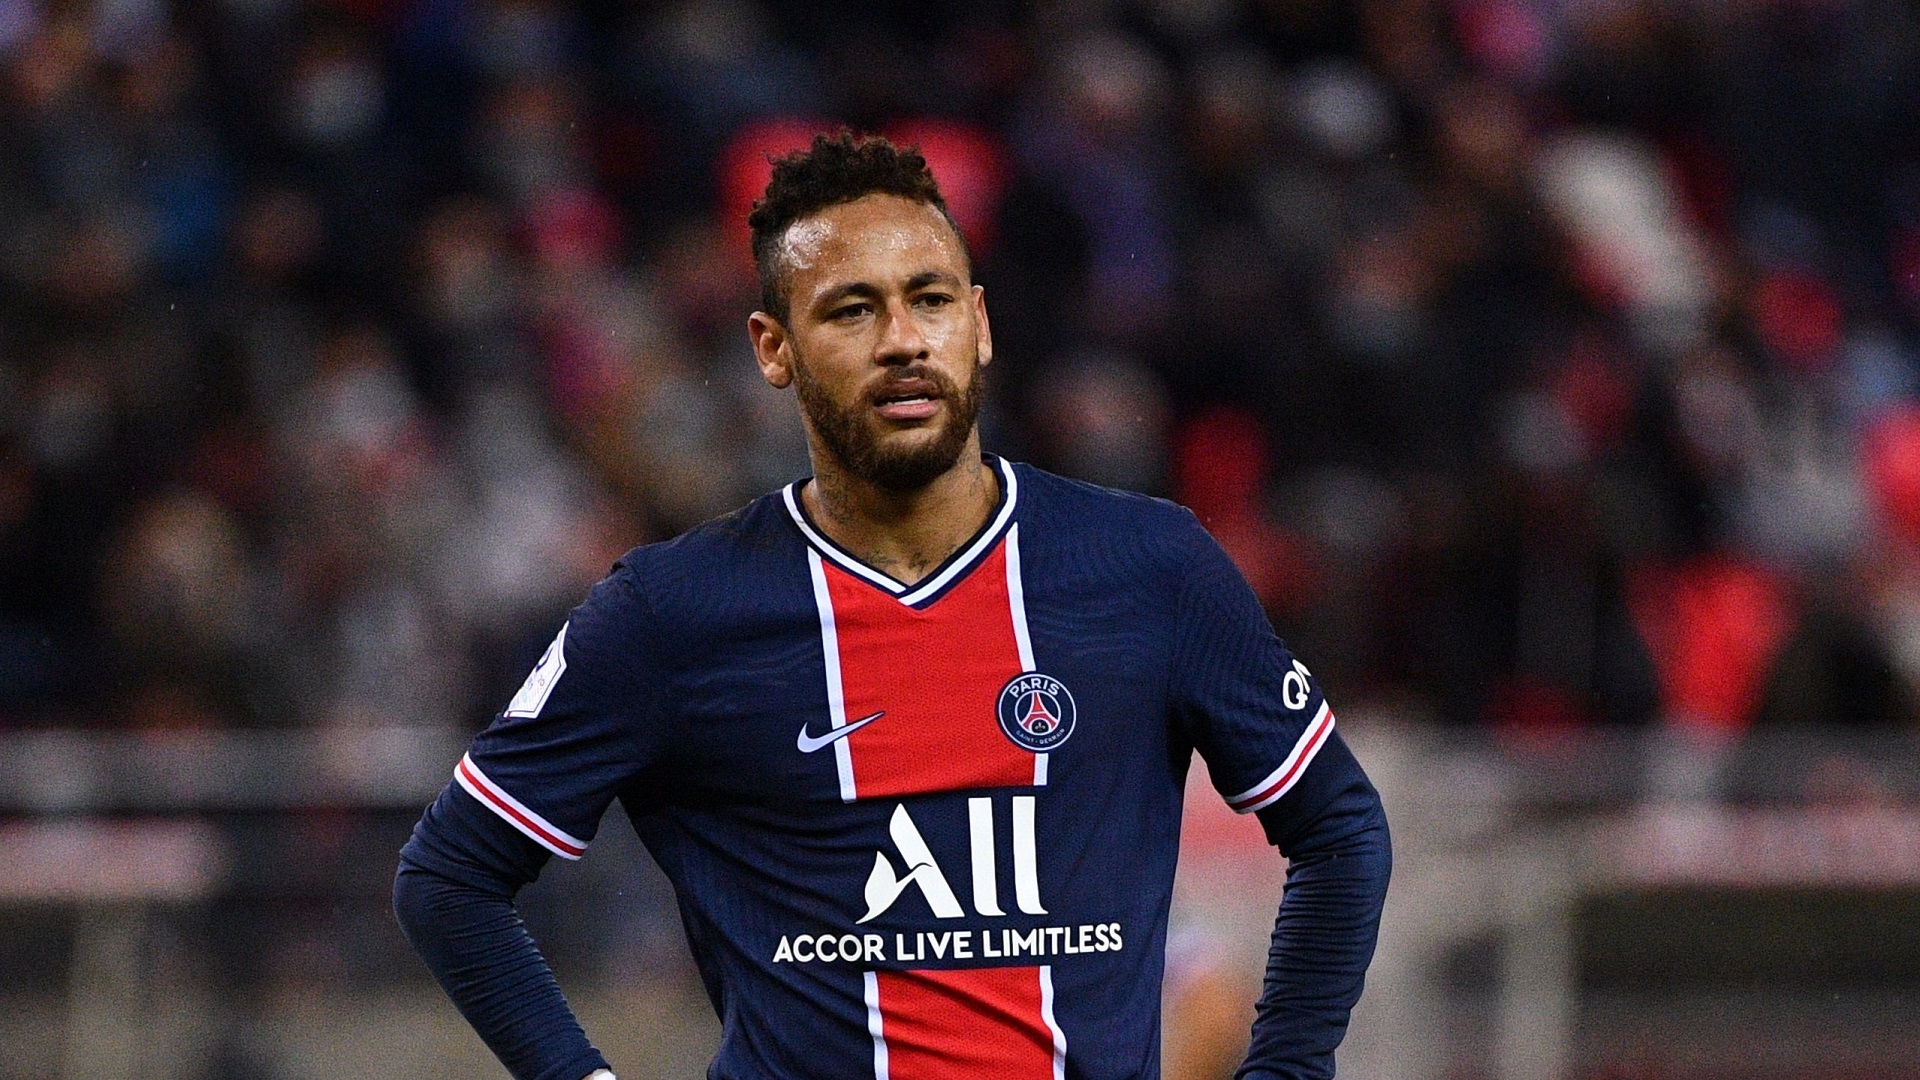 Neymar injury concern for PSG as Tuchel says he 'needs to speak with doctors' following Reims win